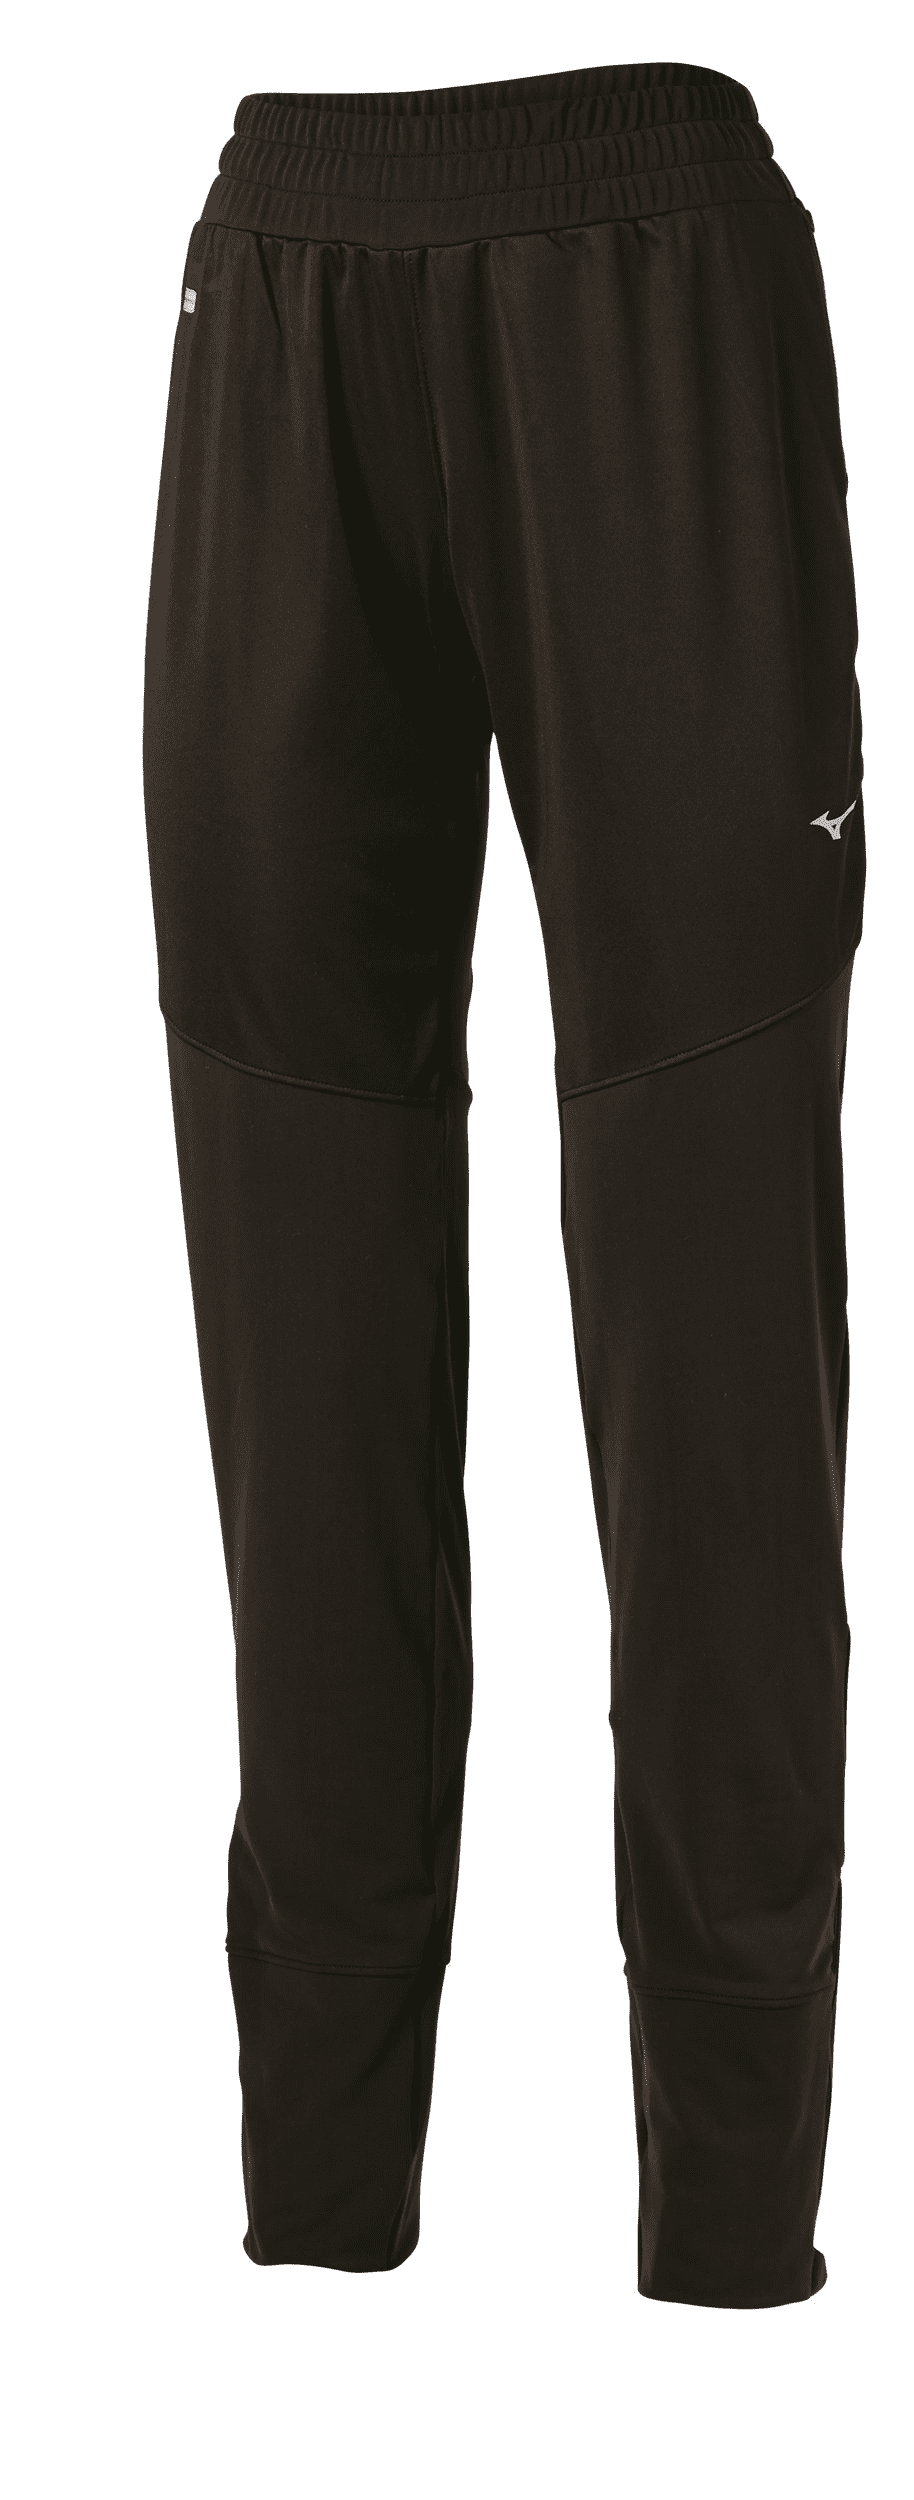 Mizuno Women's Breath Thermo Windproof Running Pant, Size Small,  Black-Charcoal (9092) 